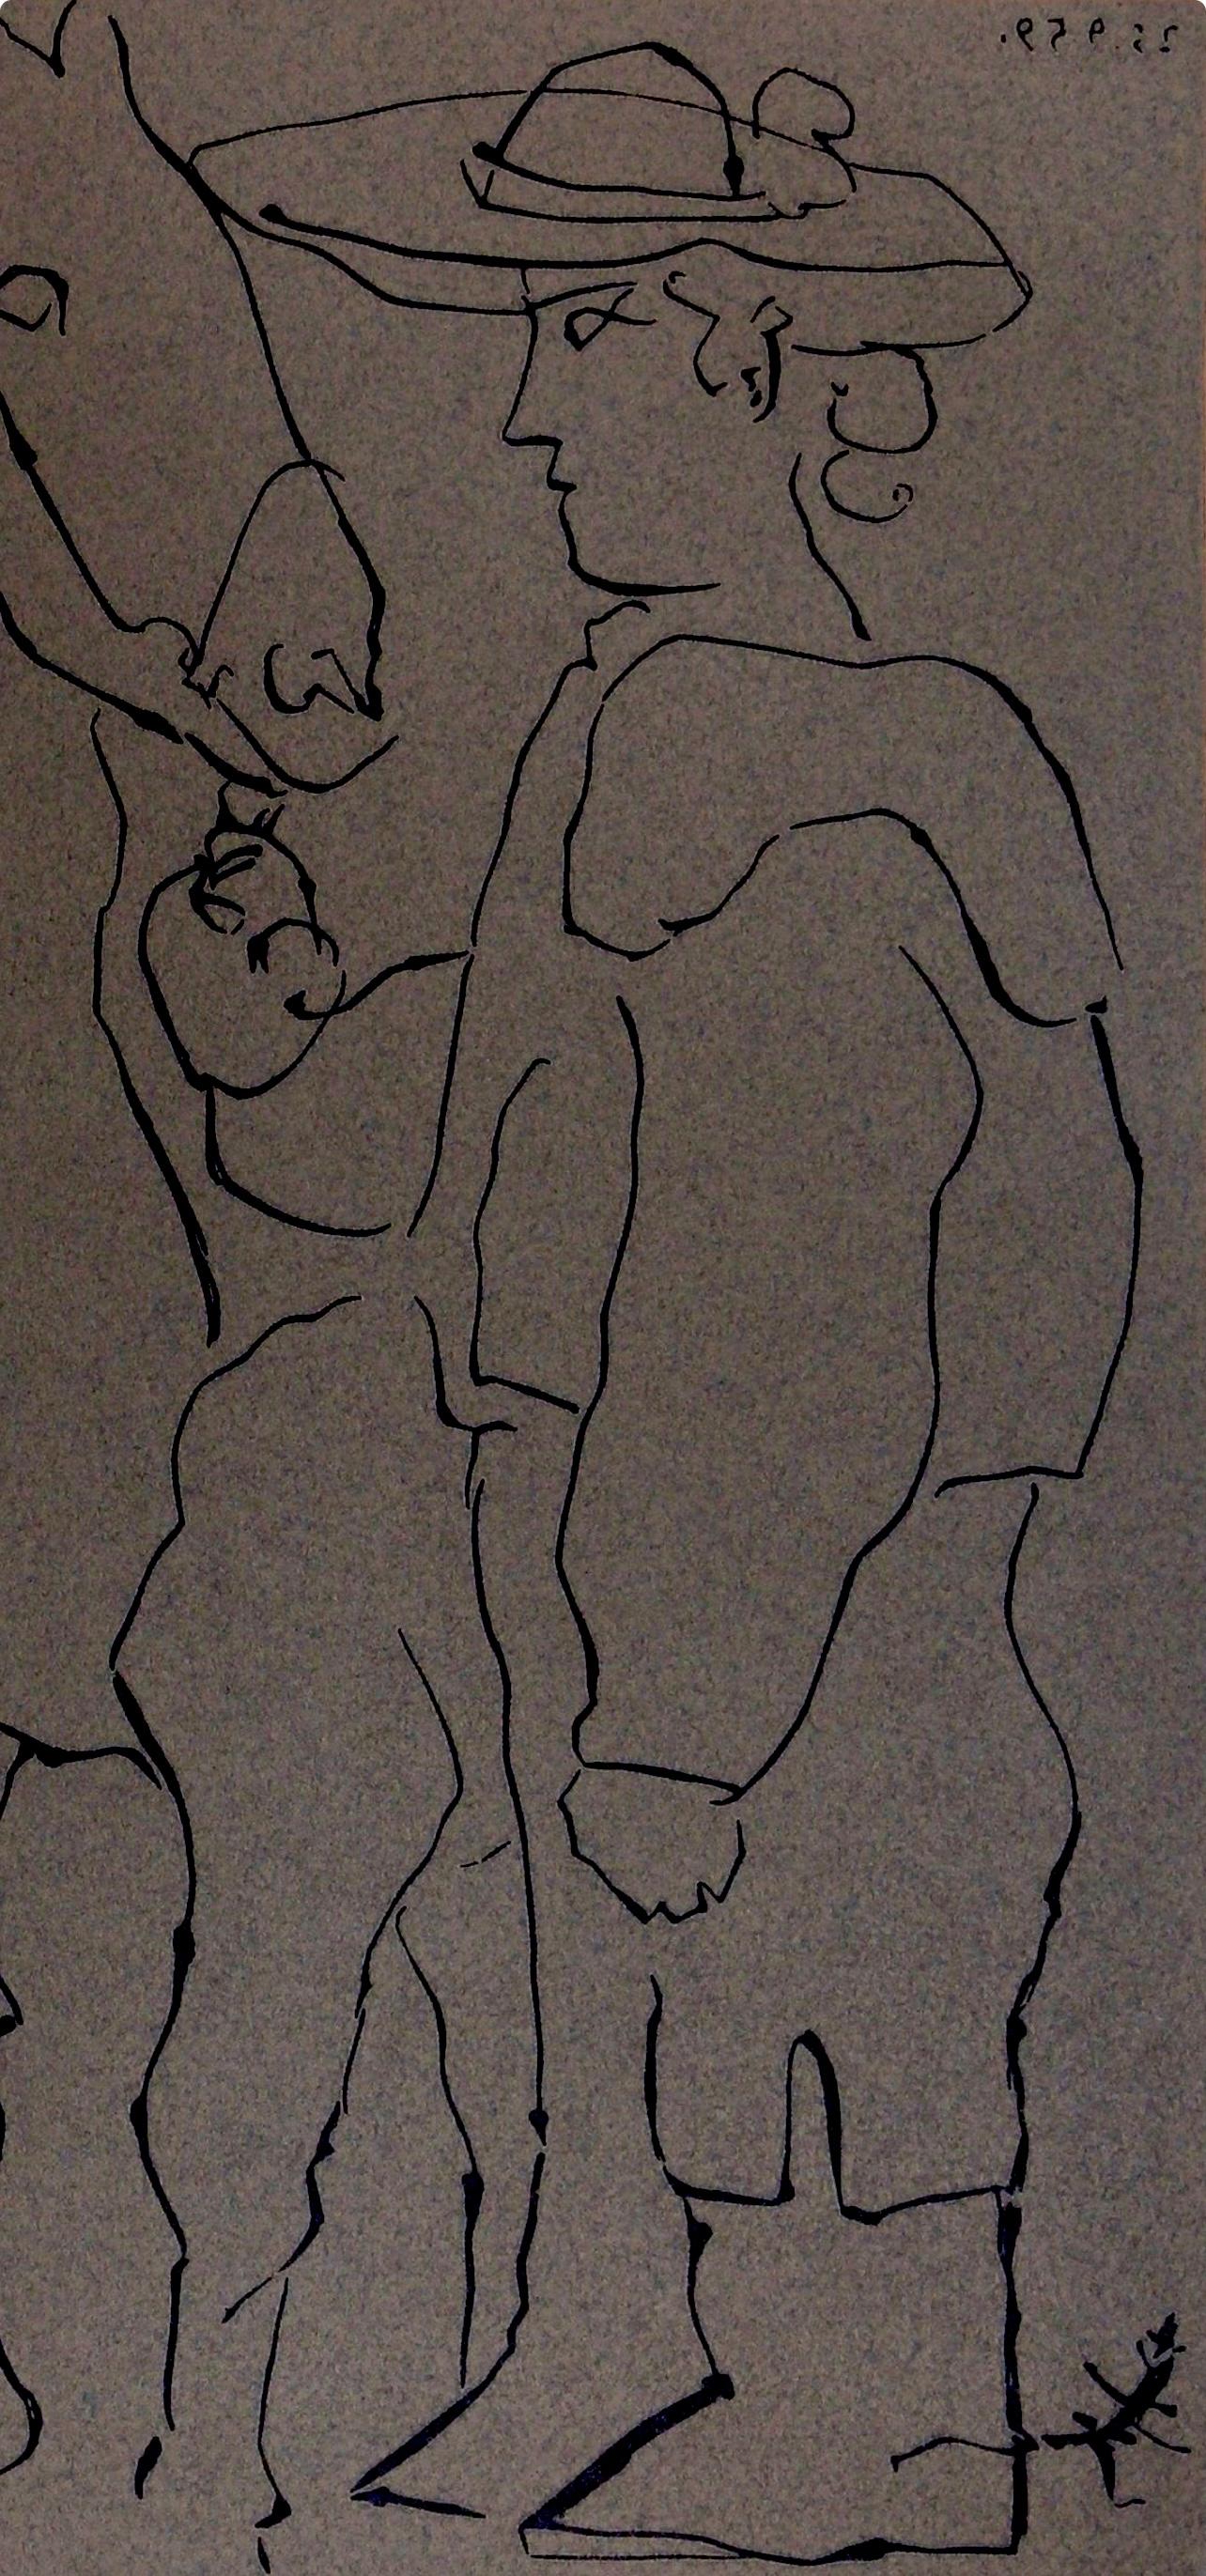 Picasso, Picador, Woman, and Horse, Pablo Picasso-Linogravures (after) For Sale 4